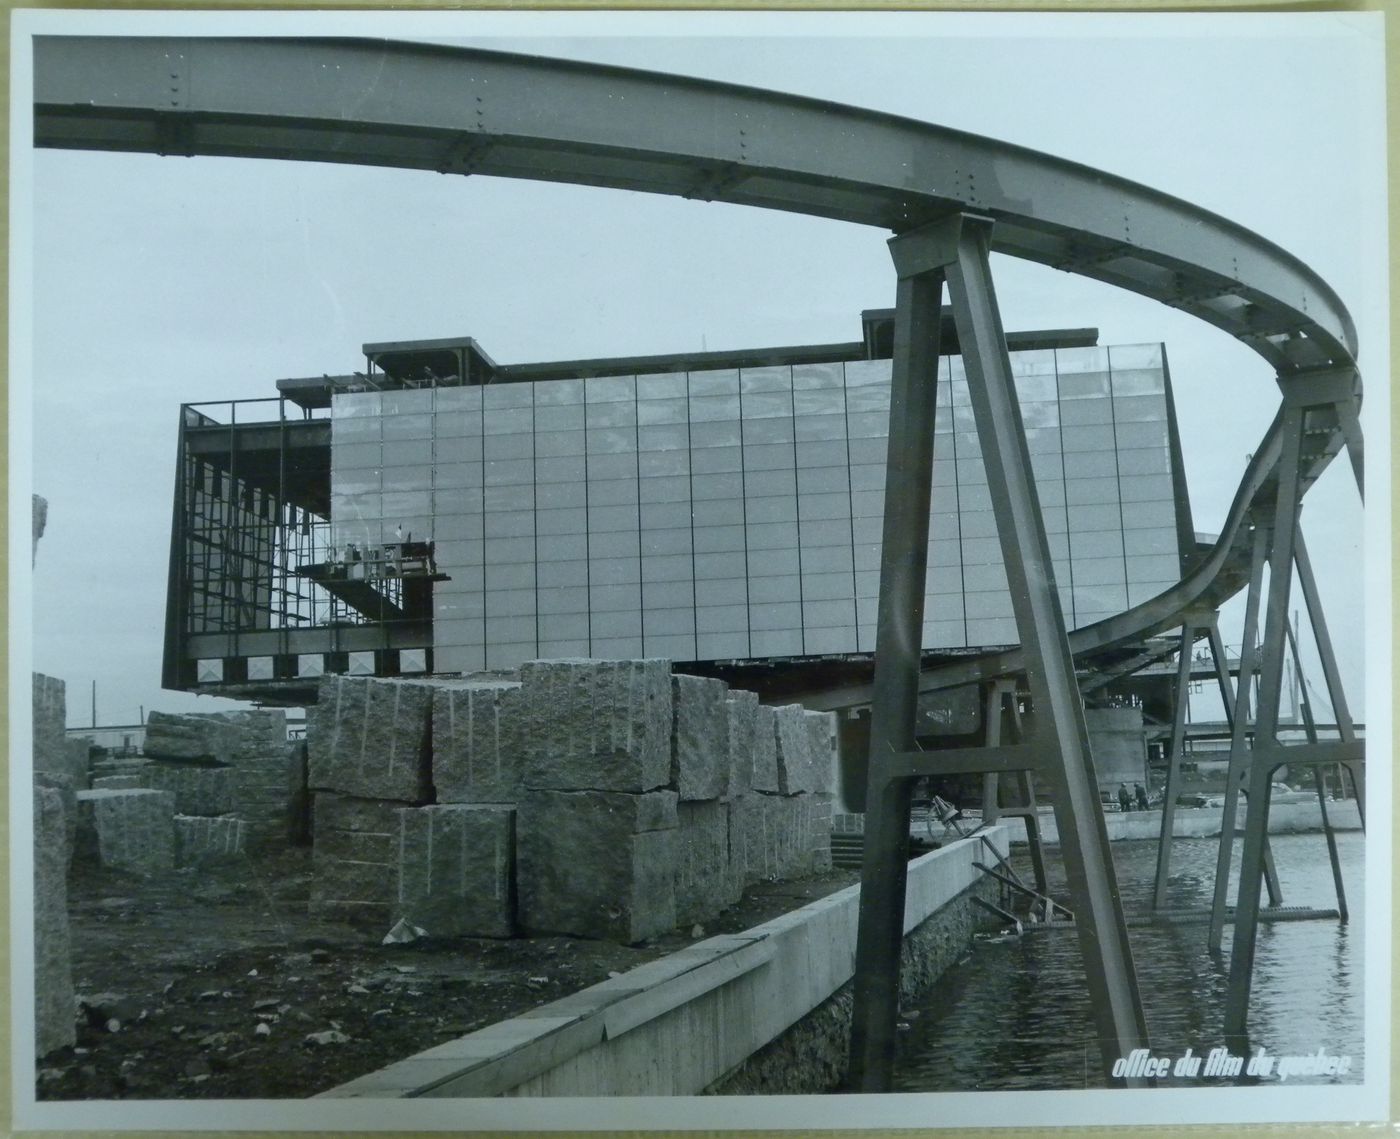 View of the Province of Quebec Pavilion at its construction stage with the minirail as foreground, Expo 67, Montréal, Québec